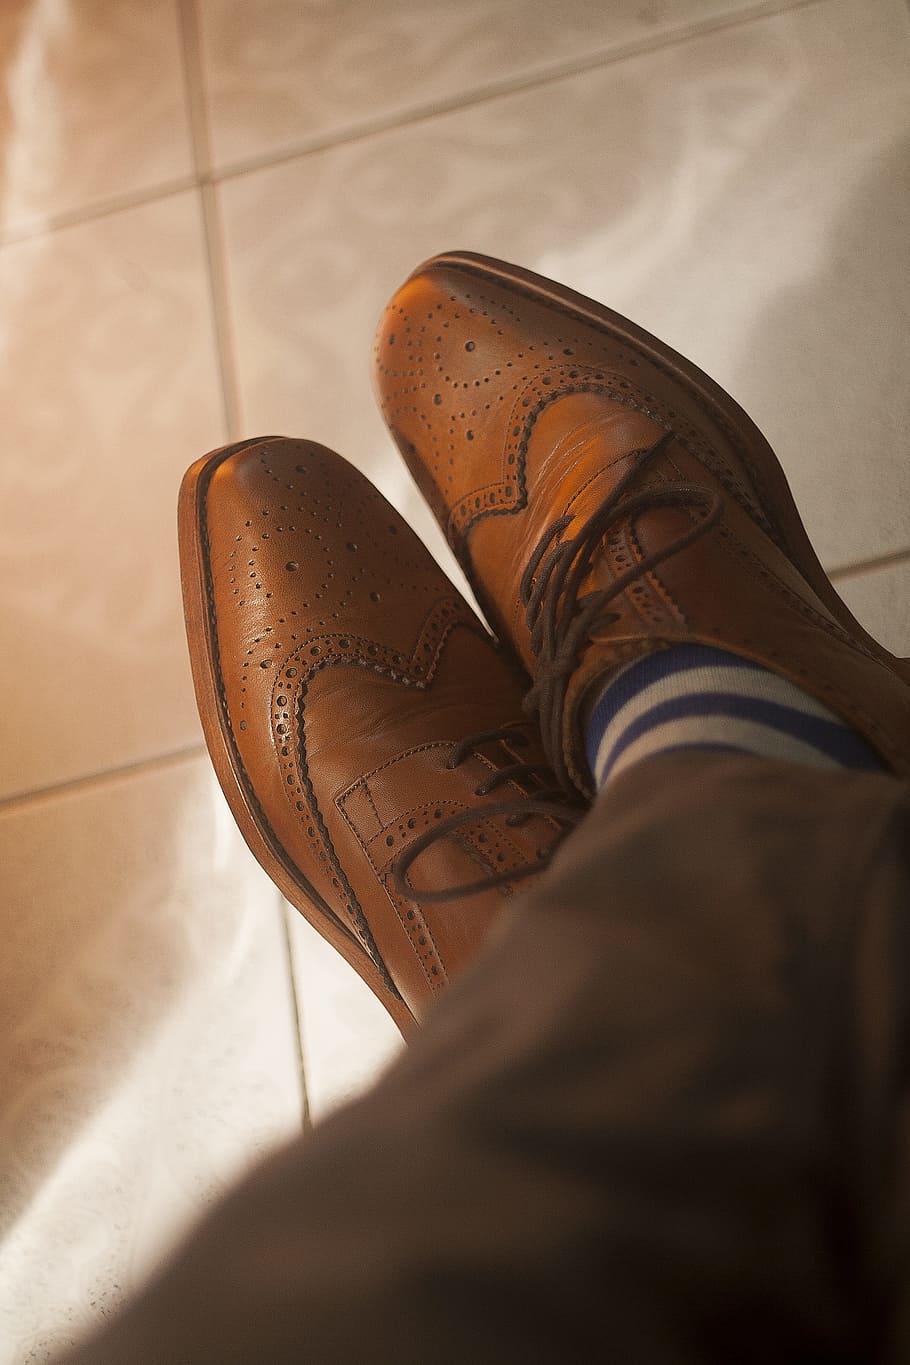 wingtip, dress shoes, leather shoes, full grain, derby, formal, brogue, brogues shoes, broguing, brown